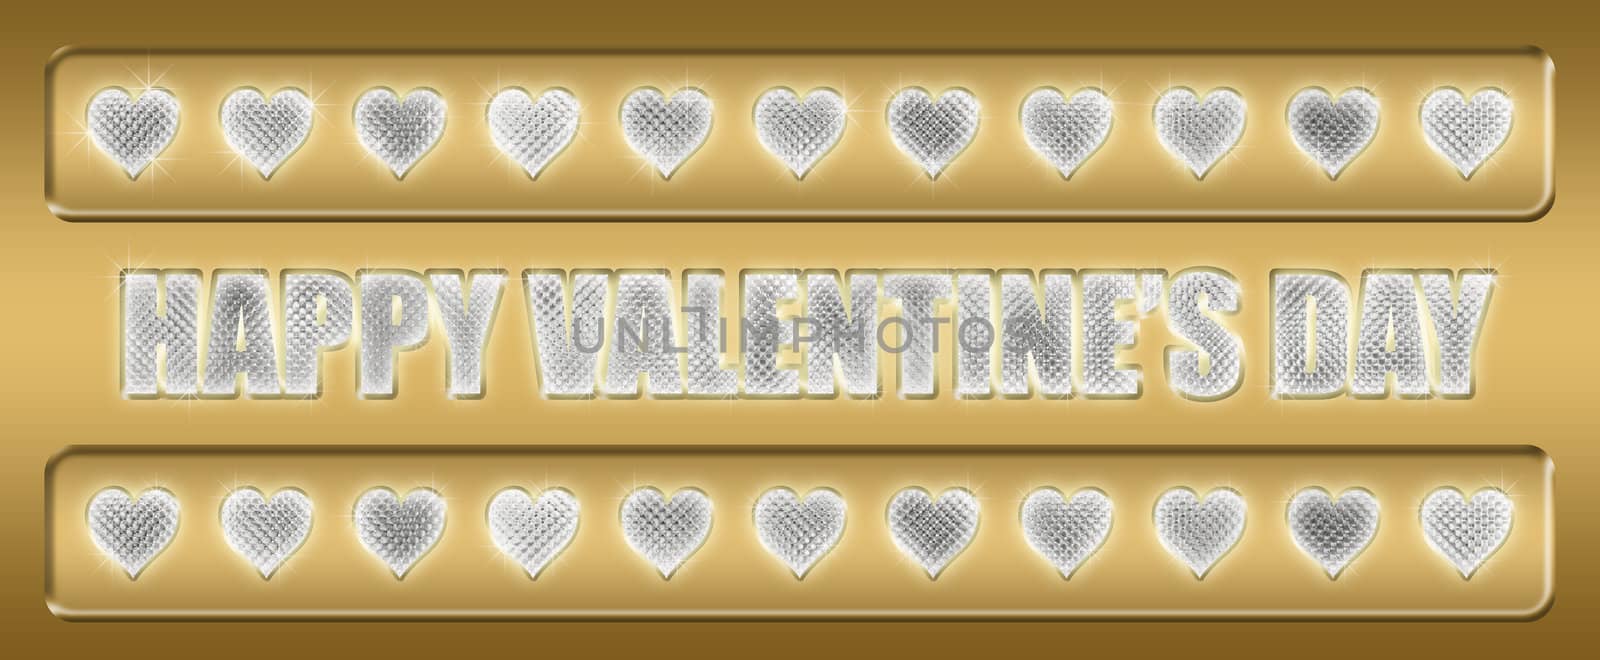 very bright bling style happy valentines banner